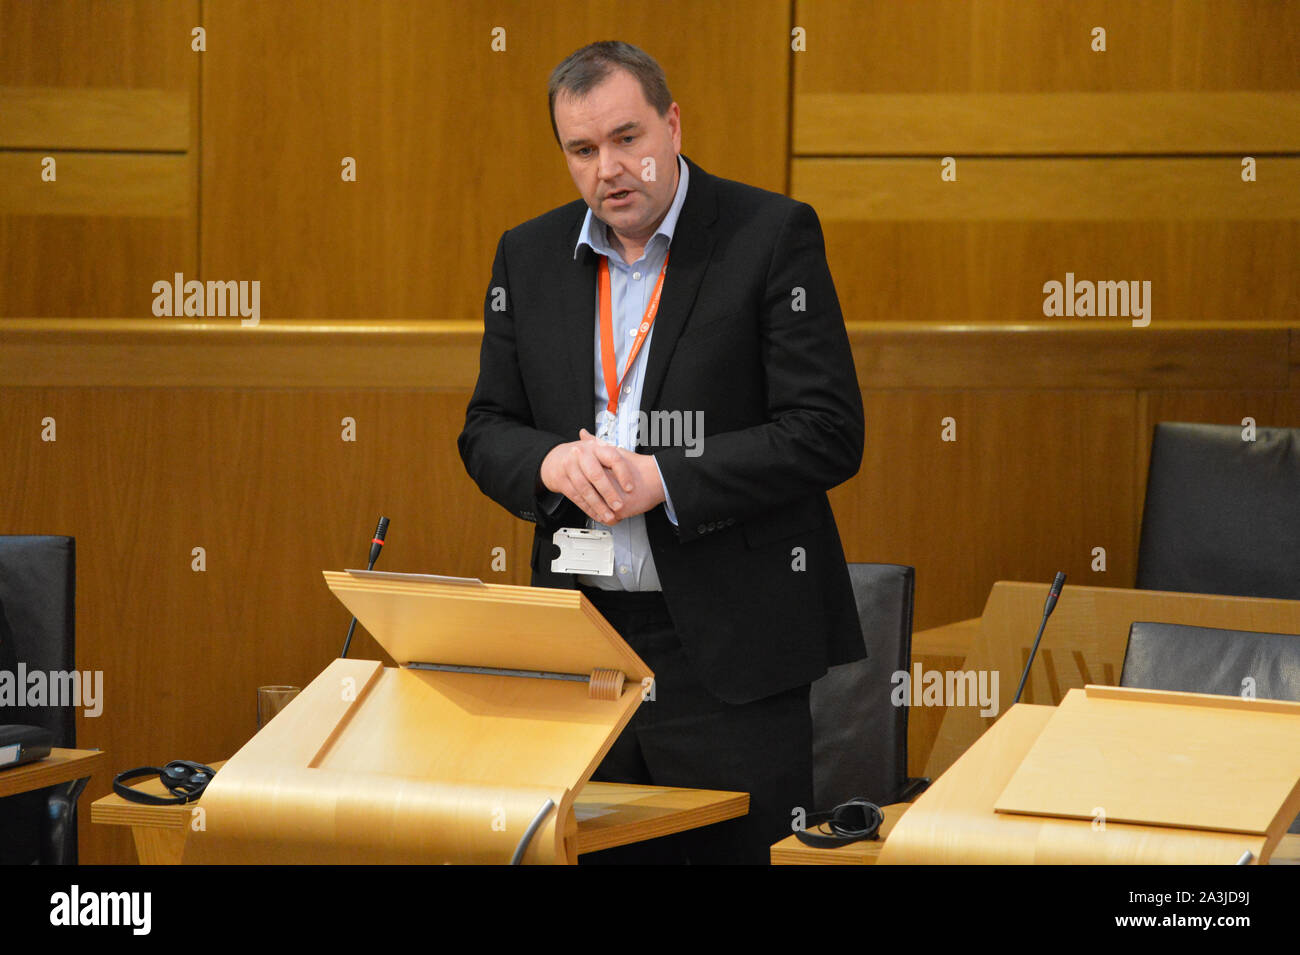 Edinburgh, 8 October 2019.  Pictured: Scottish Labour Party, Neil Findlay MSP. A report has been published detailing the range of measures being put in place by the Scottish Government to mitigate a ‘no deal’ Brexit. In a statement to the Scottish Parliament, Deputy First Minister John Swinney said: “The document we have published today sets out not just the measures we are taking to mitigate the worst impacts of a ‘no deal’ Brexit, but also the areas where we require action from the UK Government. Stock Photo